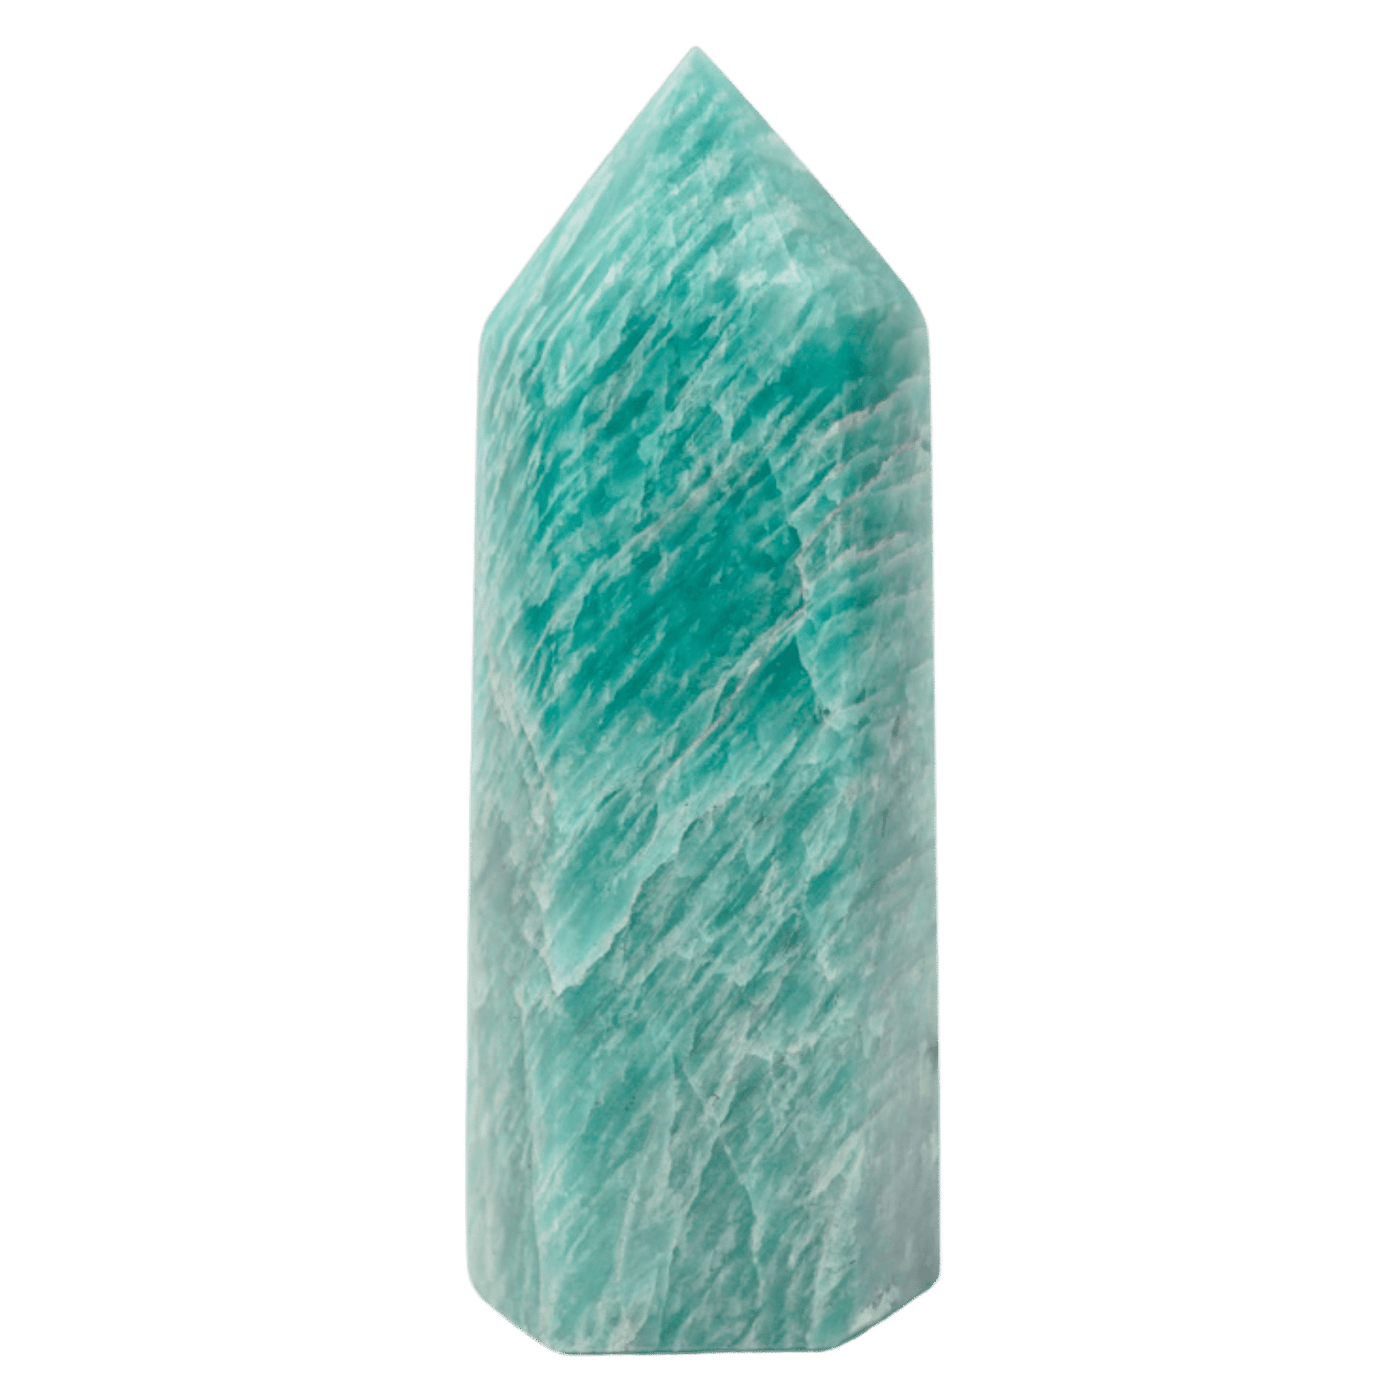 detailed view of natural Amazonite crystal pillar point by Energy Muse highlighting the water-like striations throughout the surface.